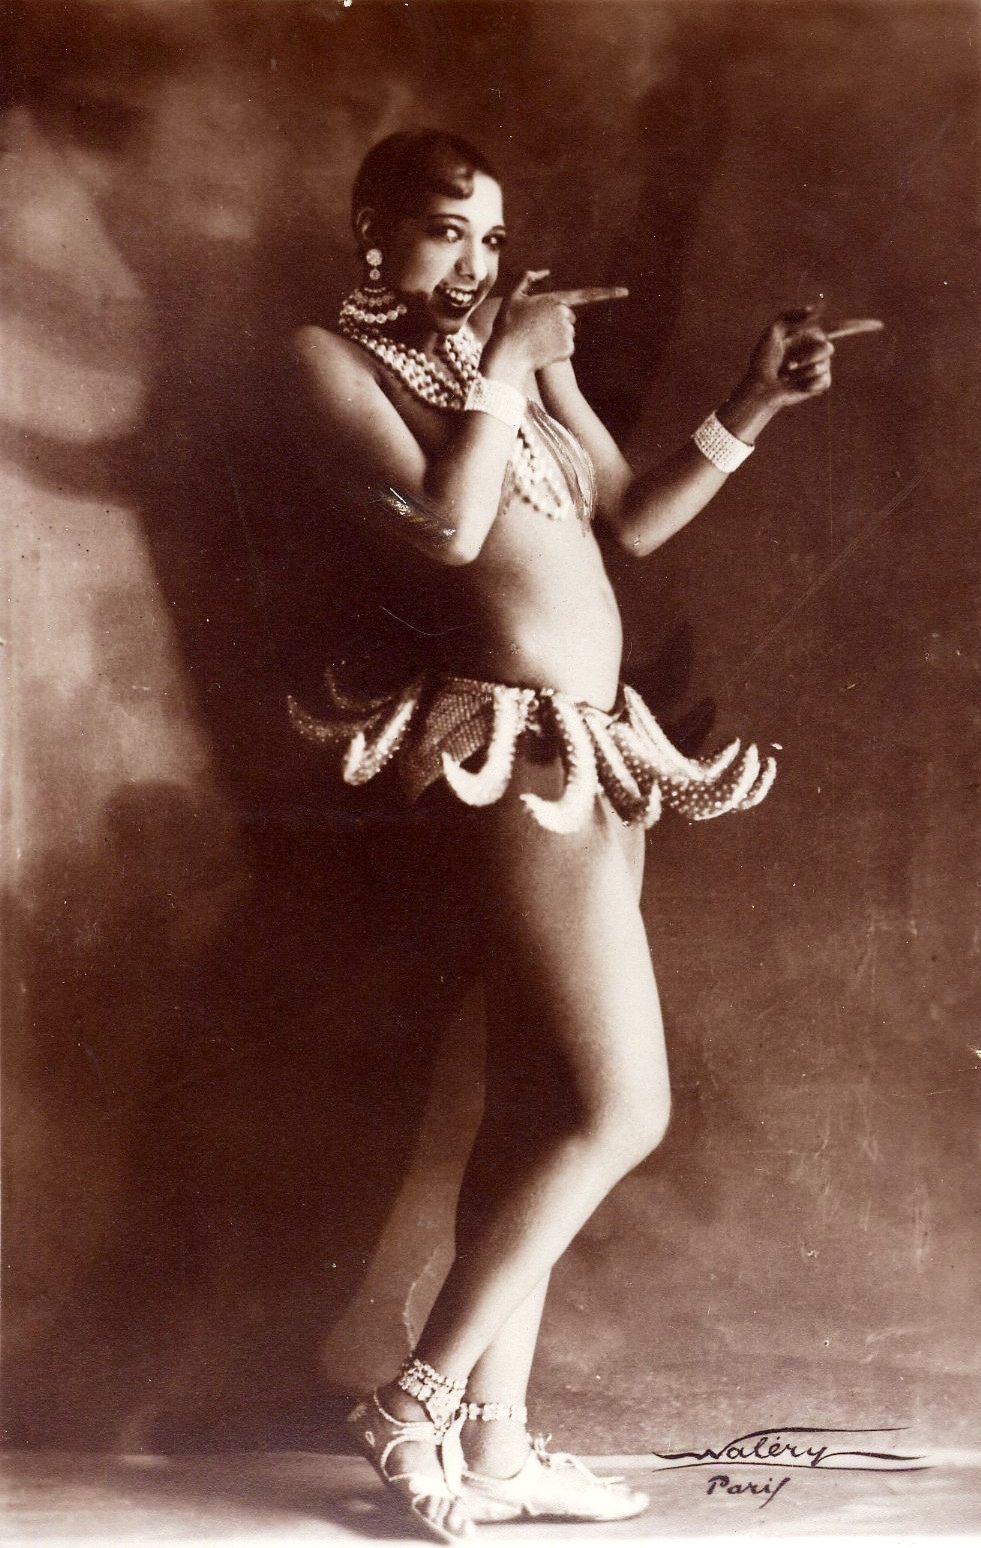 Josephine Baker in Banana Skirt from the Folies Bergère production "Un Vent de Folie," 1927. Picture by Walery, French, (1863-1935). PD by age (Walery died more than 70 years ago). From Wikipedia.